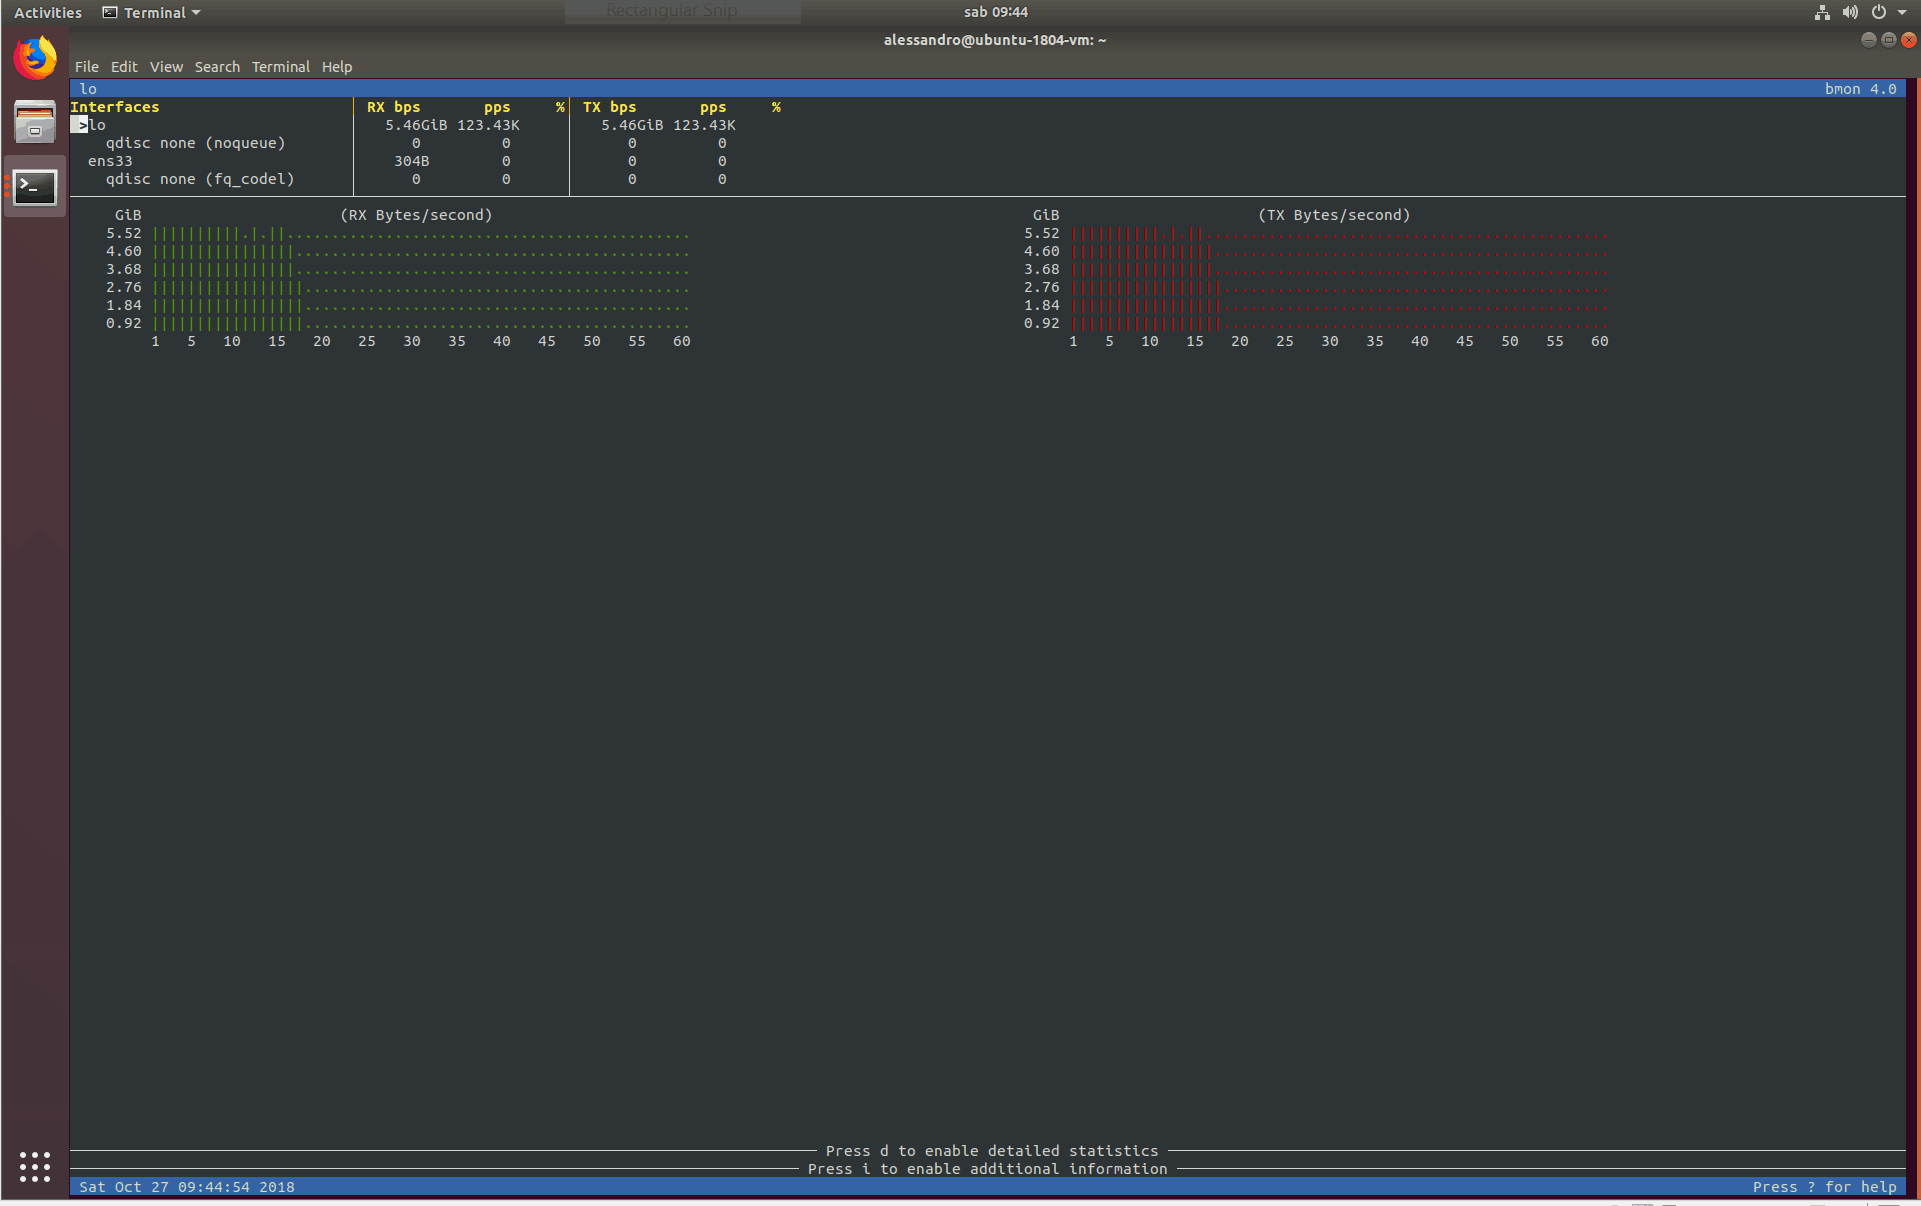 How to use bmon: run bmon in the terminal to see the charts.